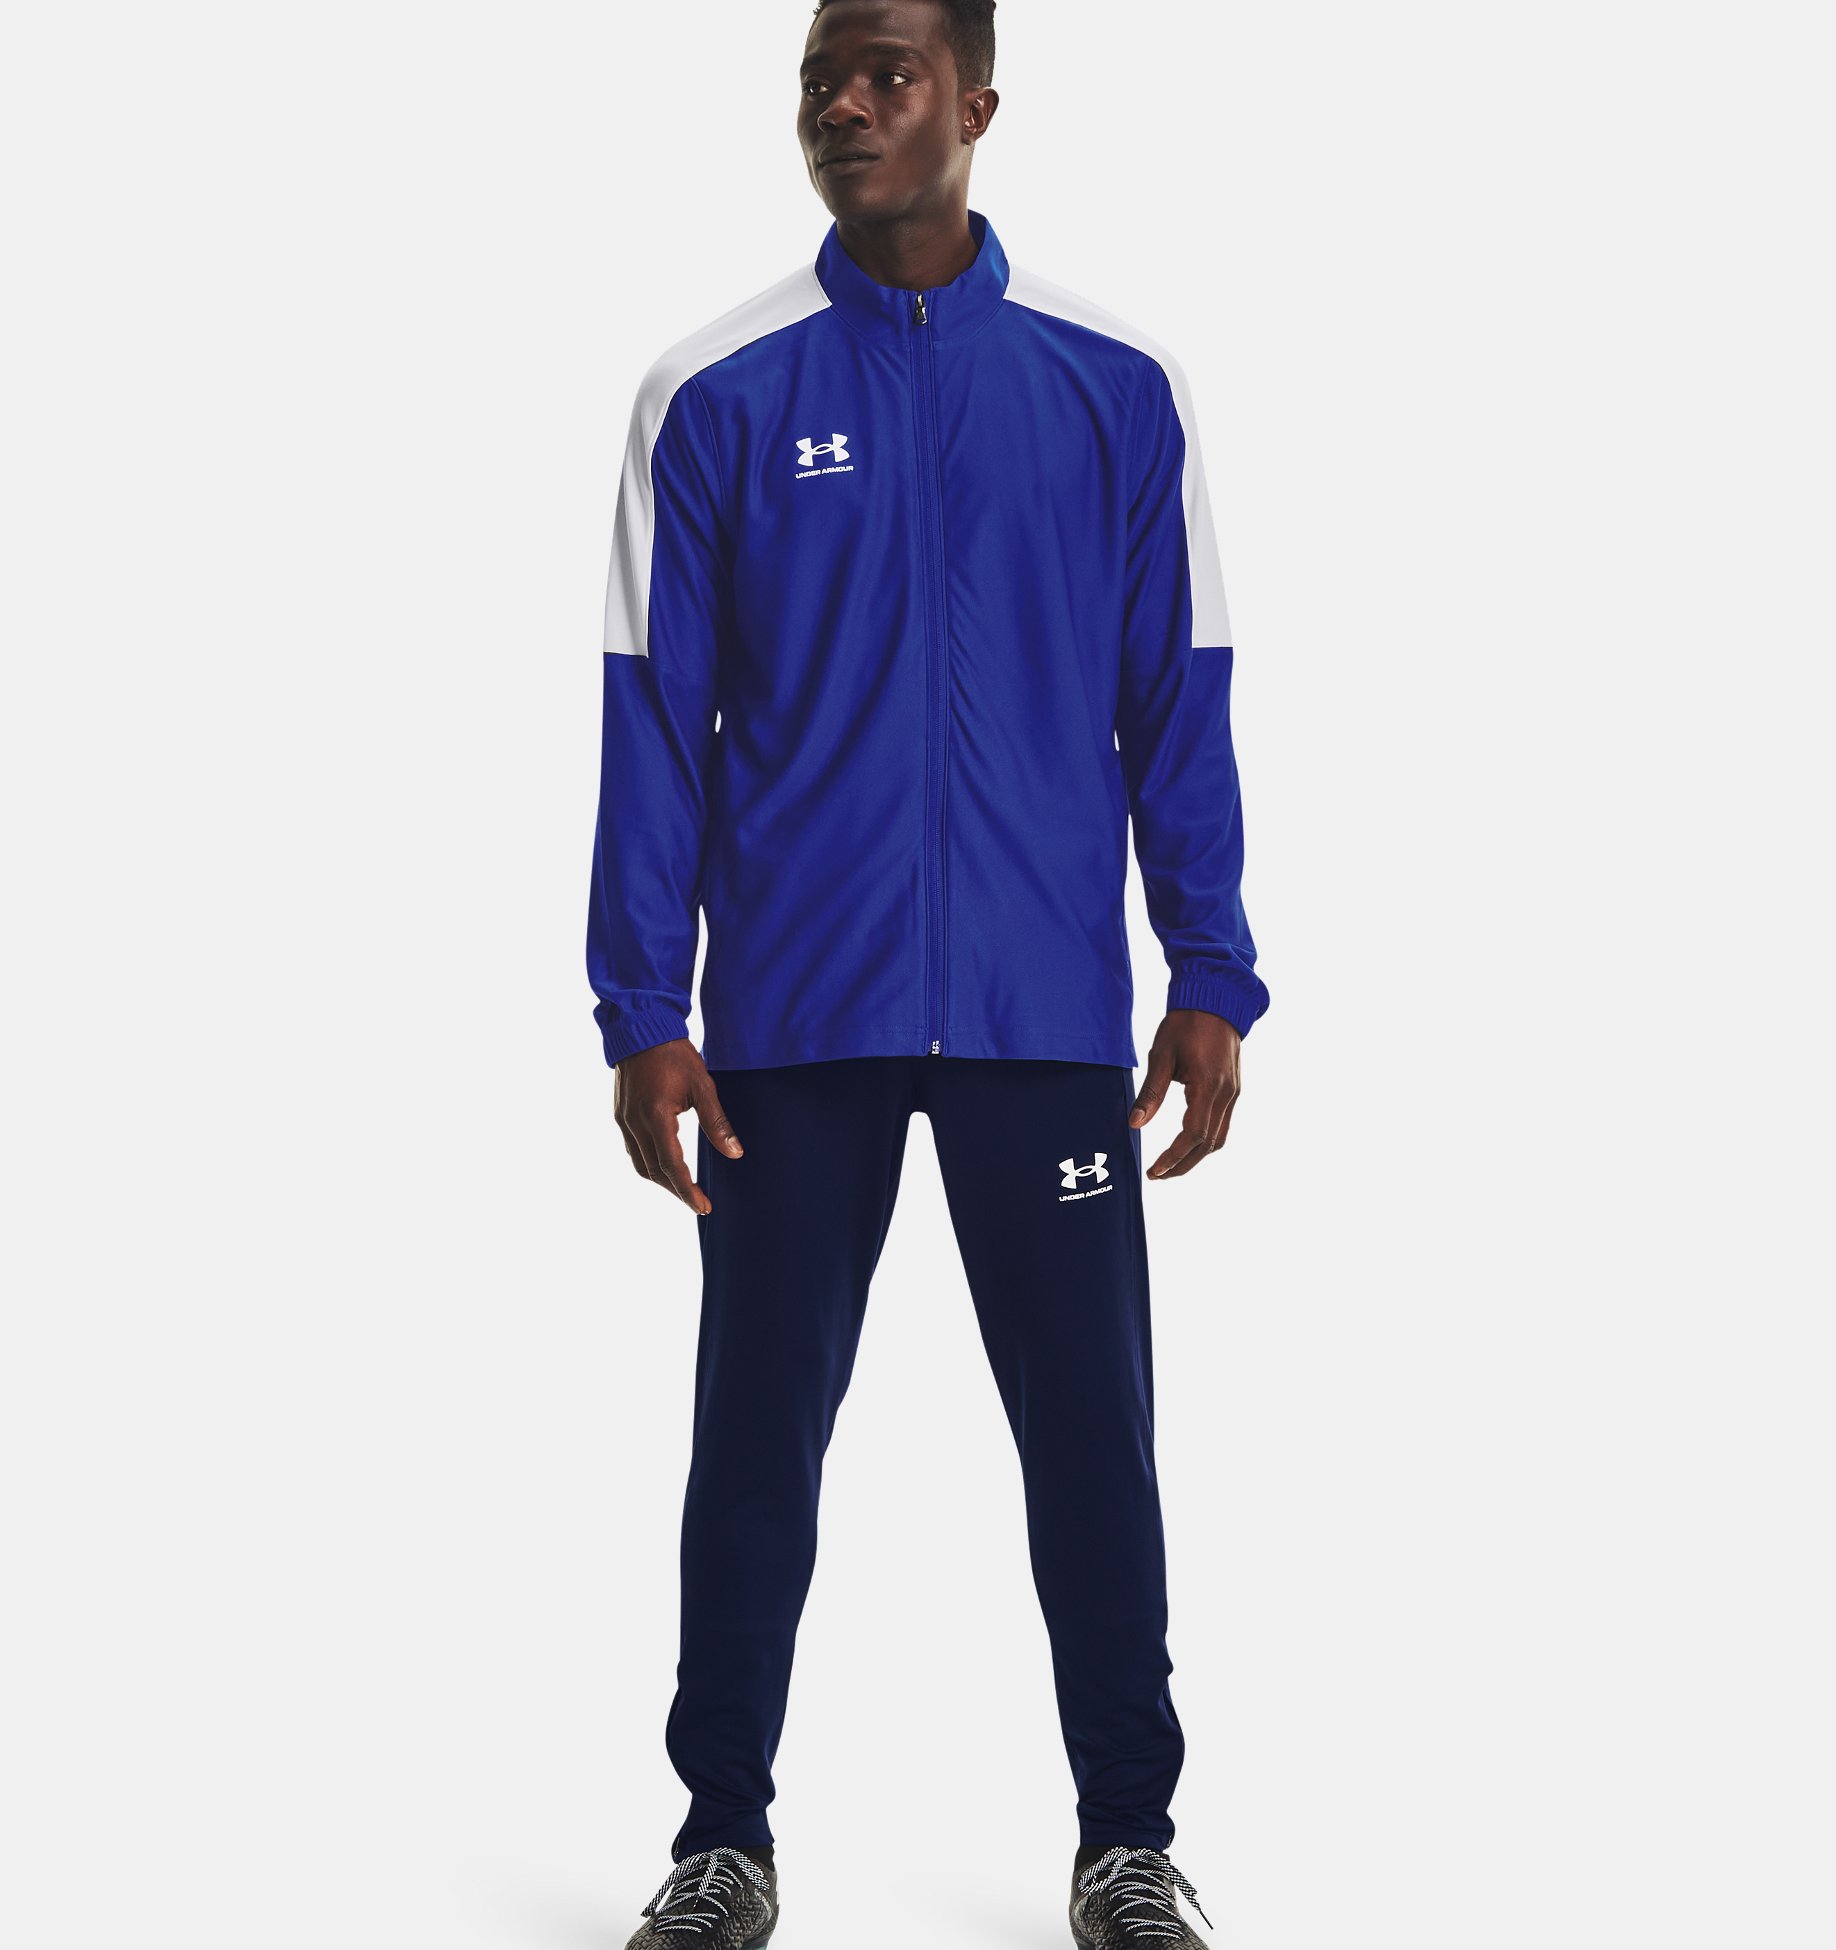 Complete Sportswear Set Tracksuit with Jacket and Joggers Under Armour Men Challenger II Knit Warm-Up 